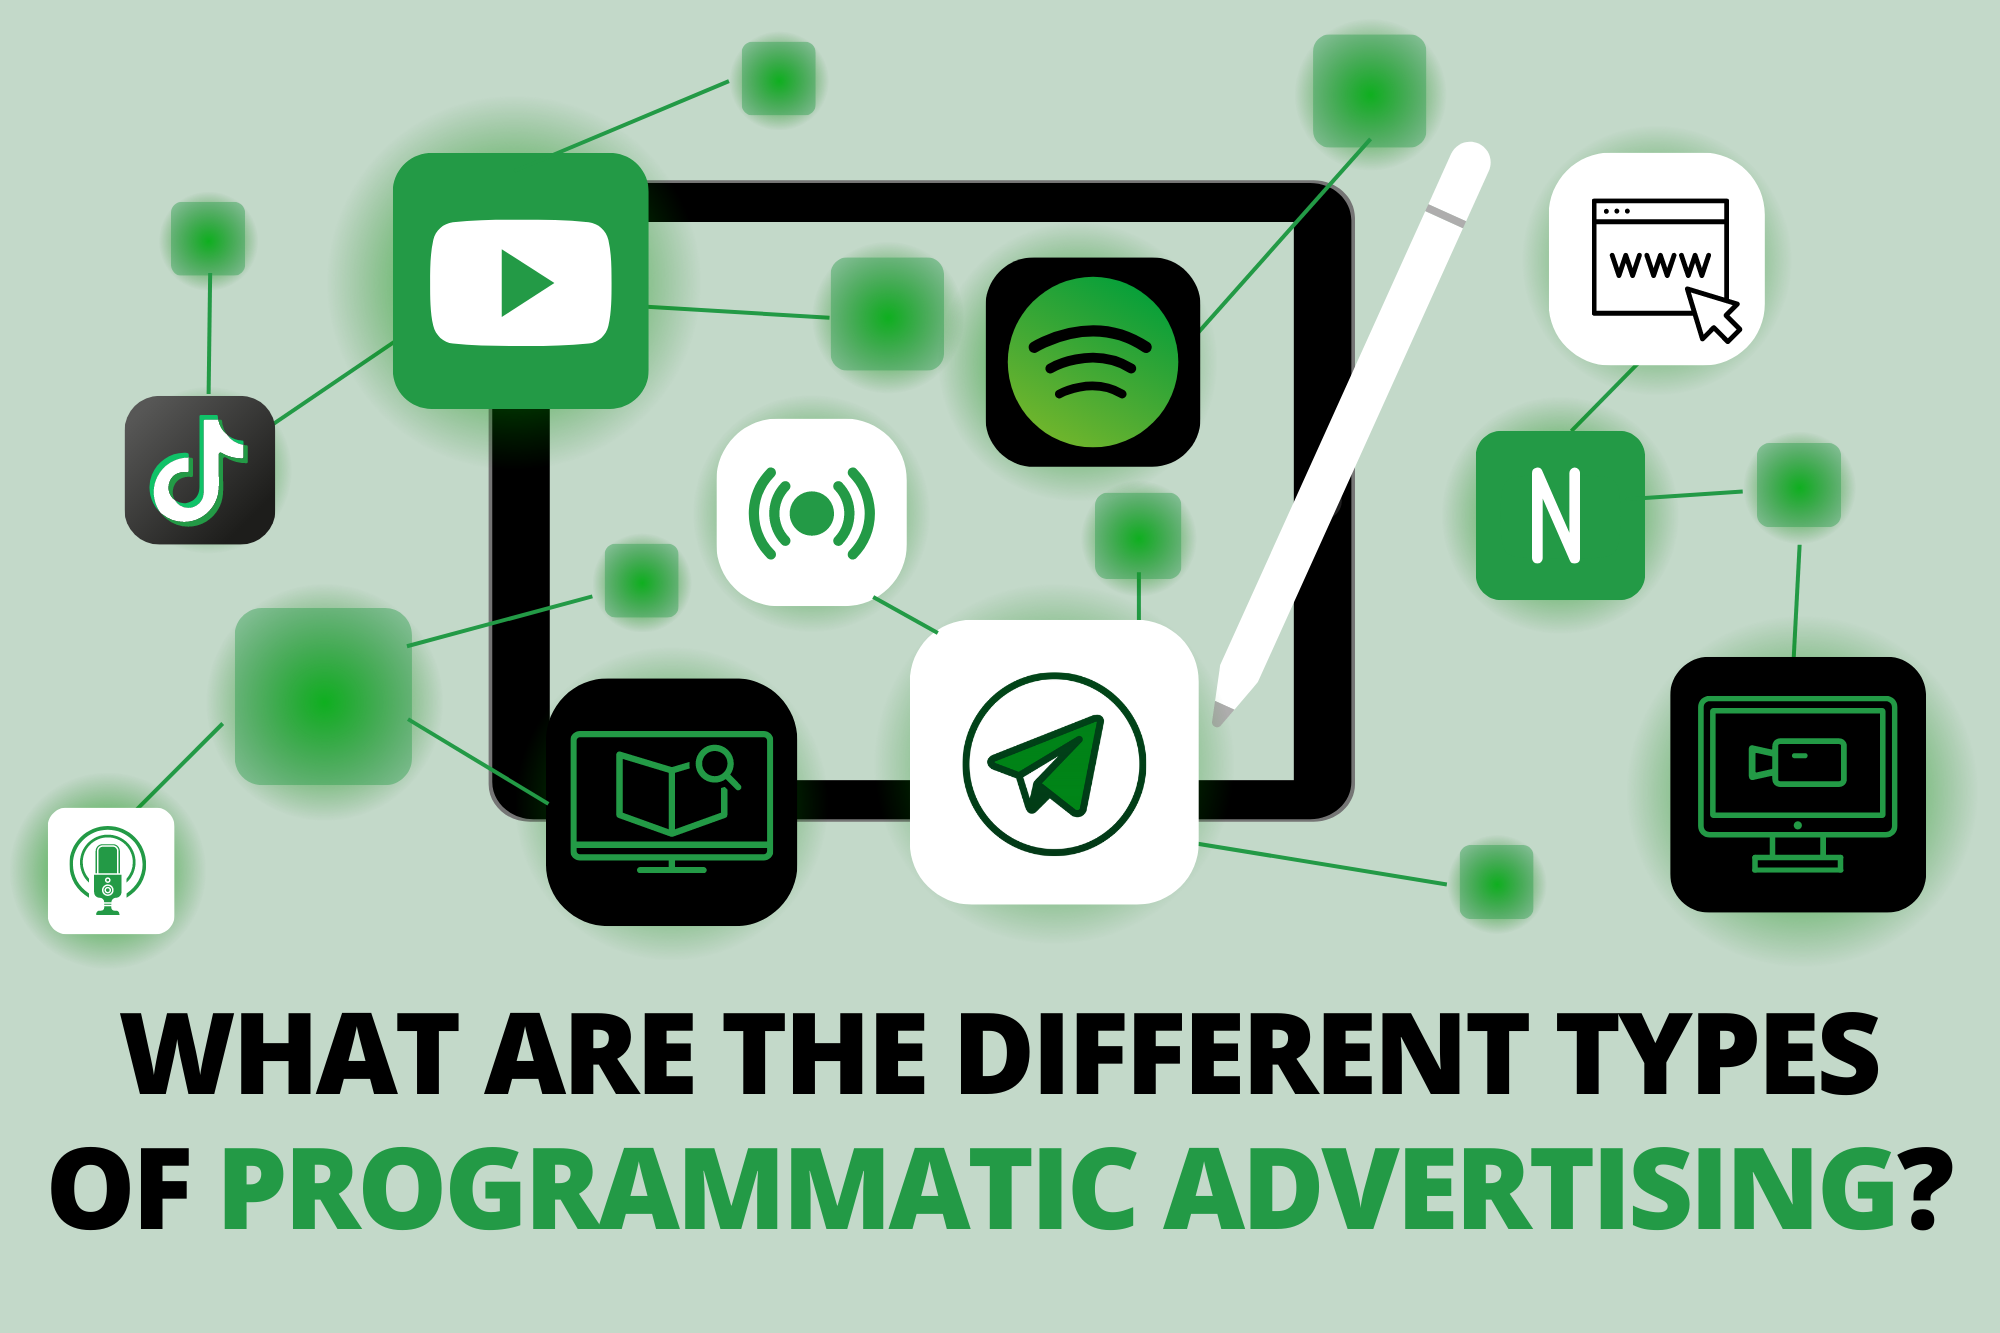 What Are the Different Types of Programmatic Advertising?